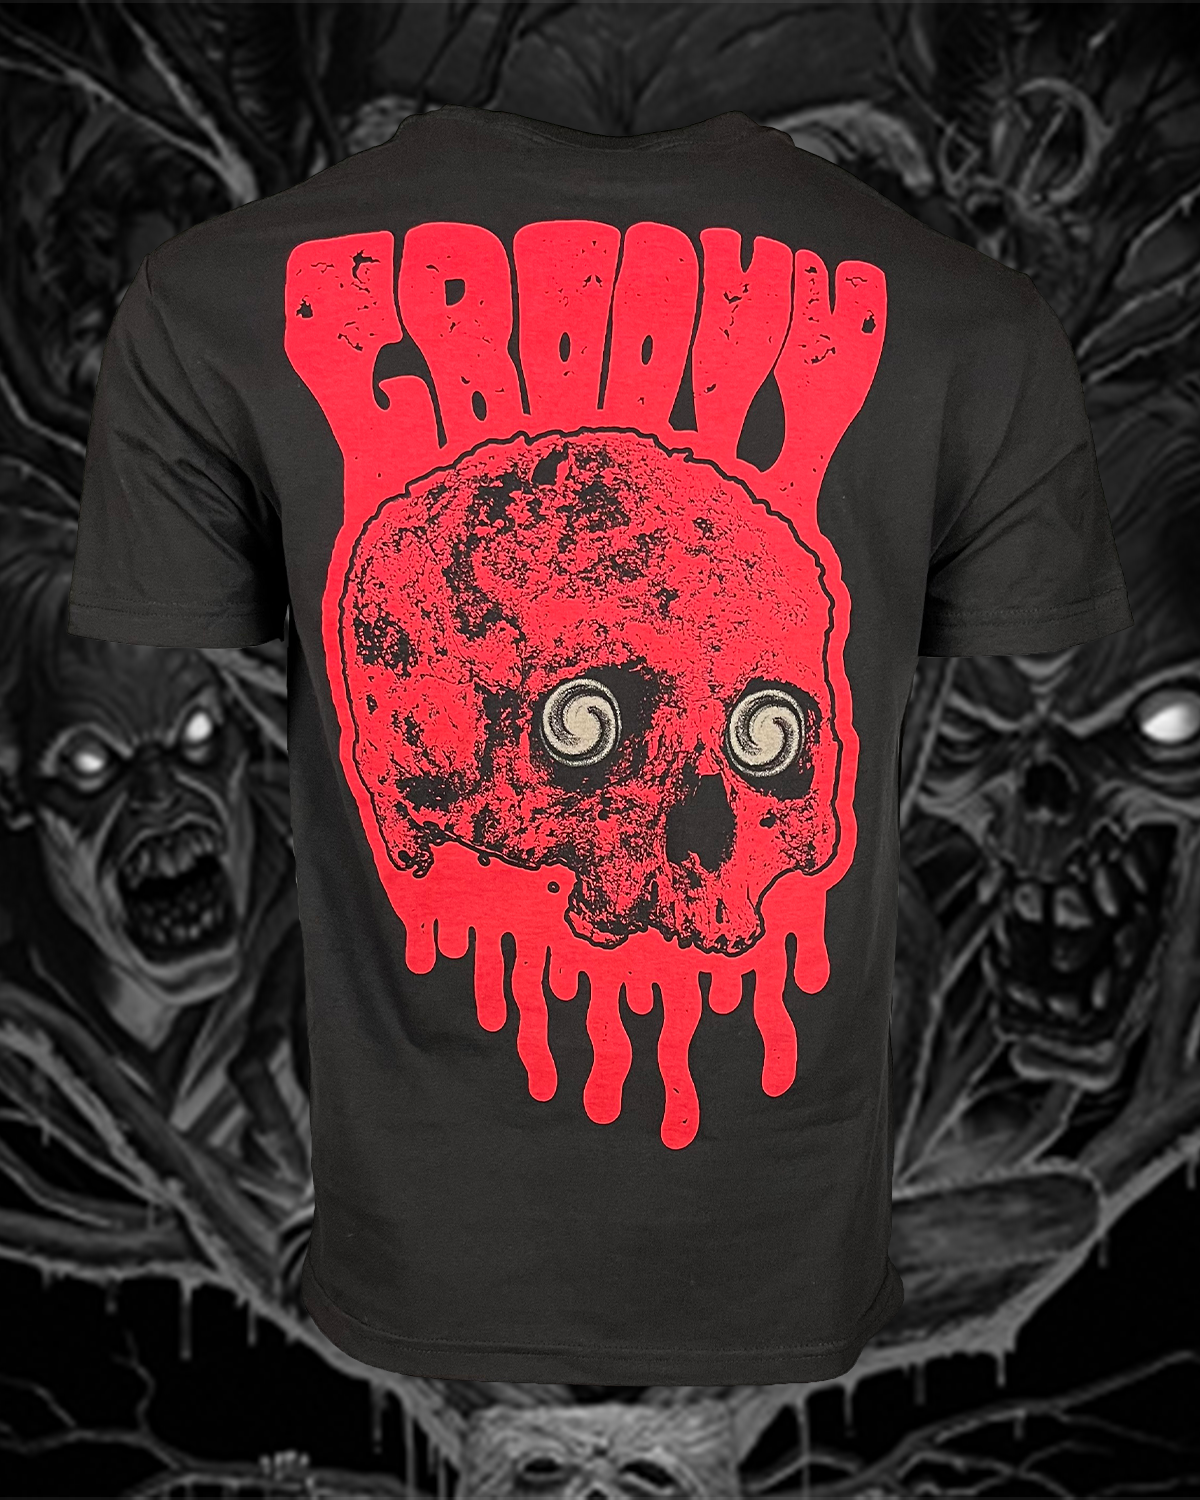 Evil Dead 2 Groovy Back View